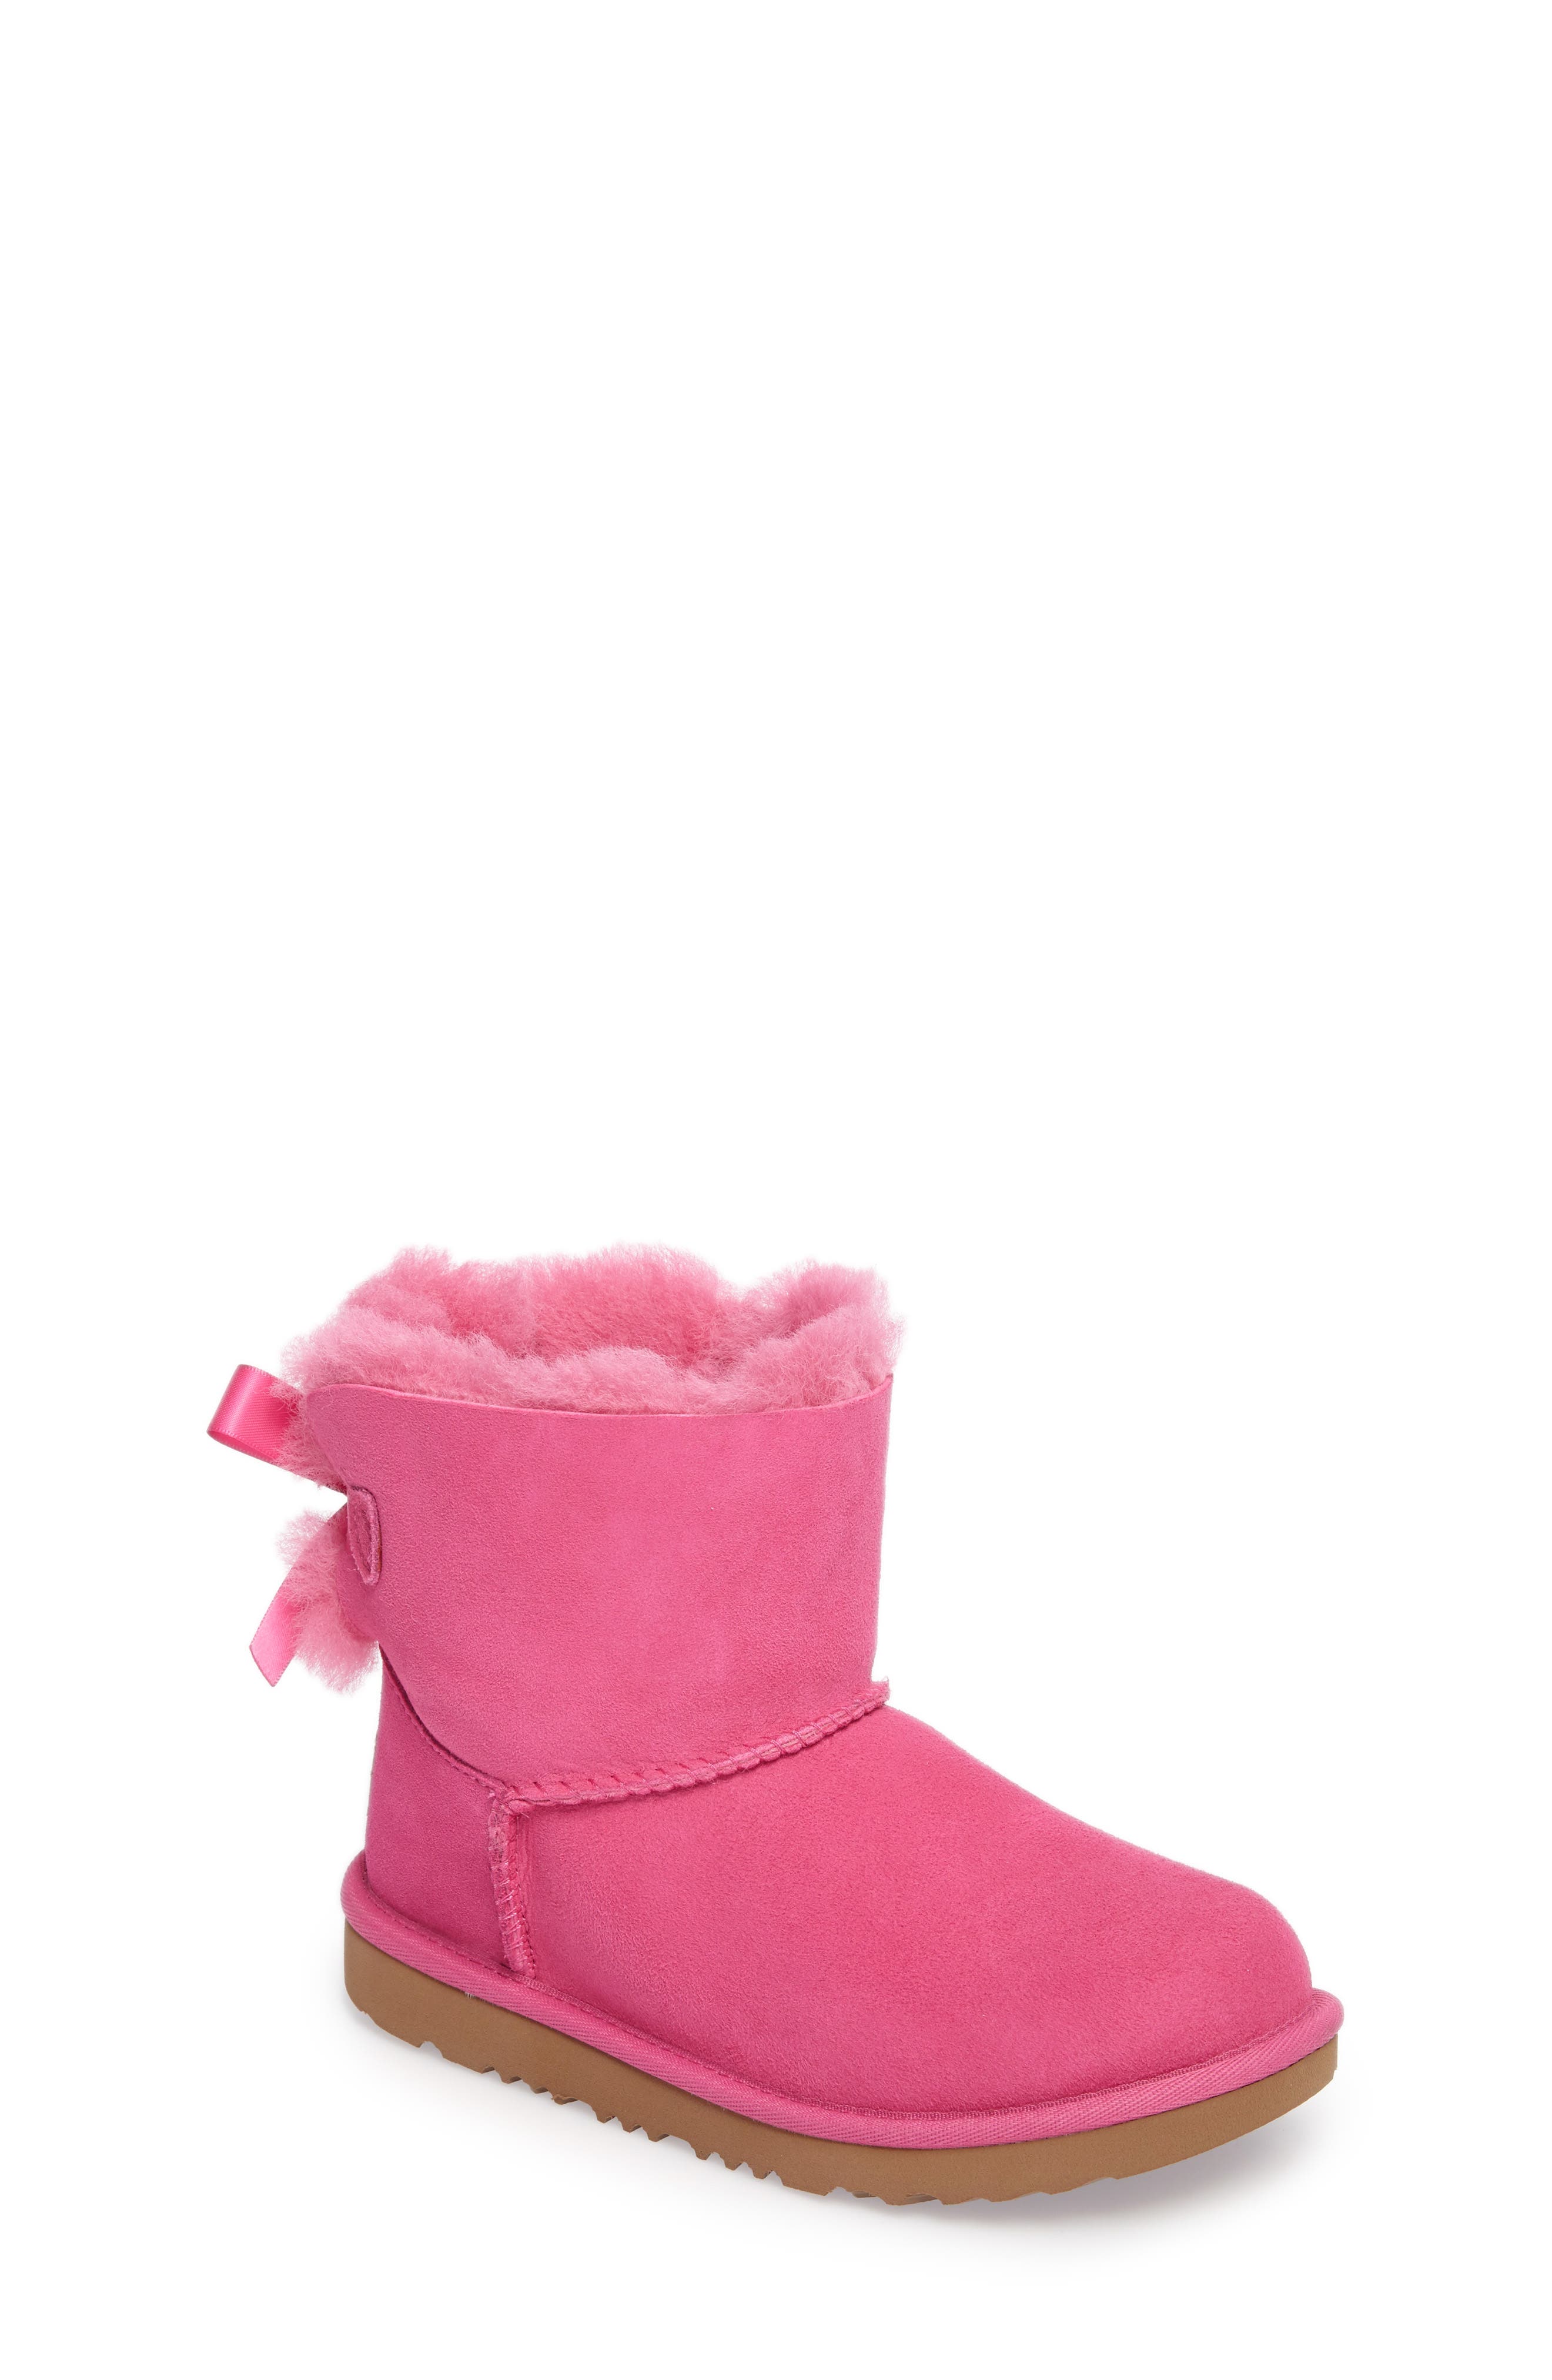 ugg children's boots on clearance